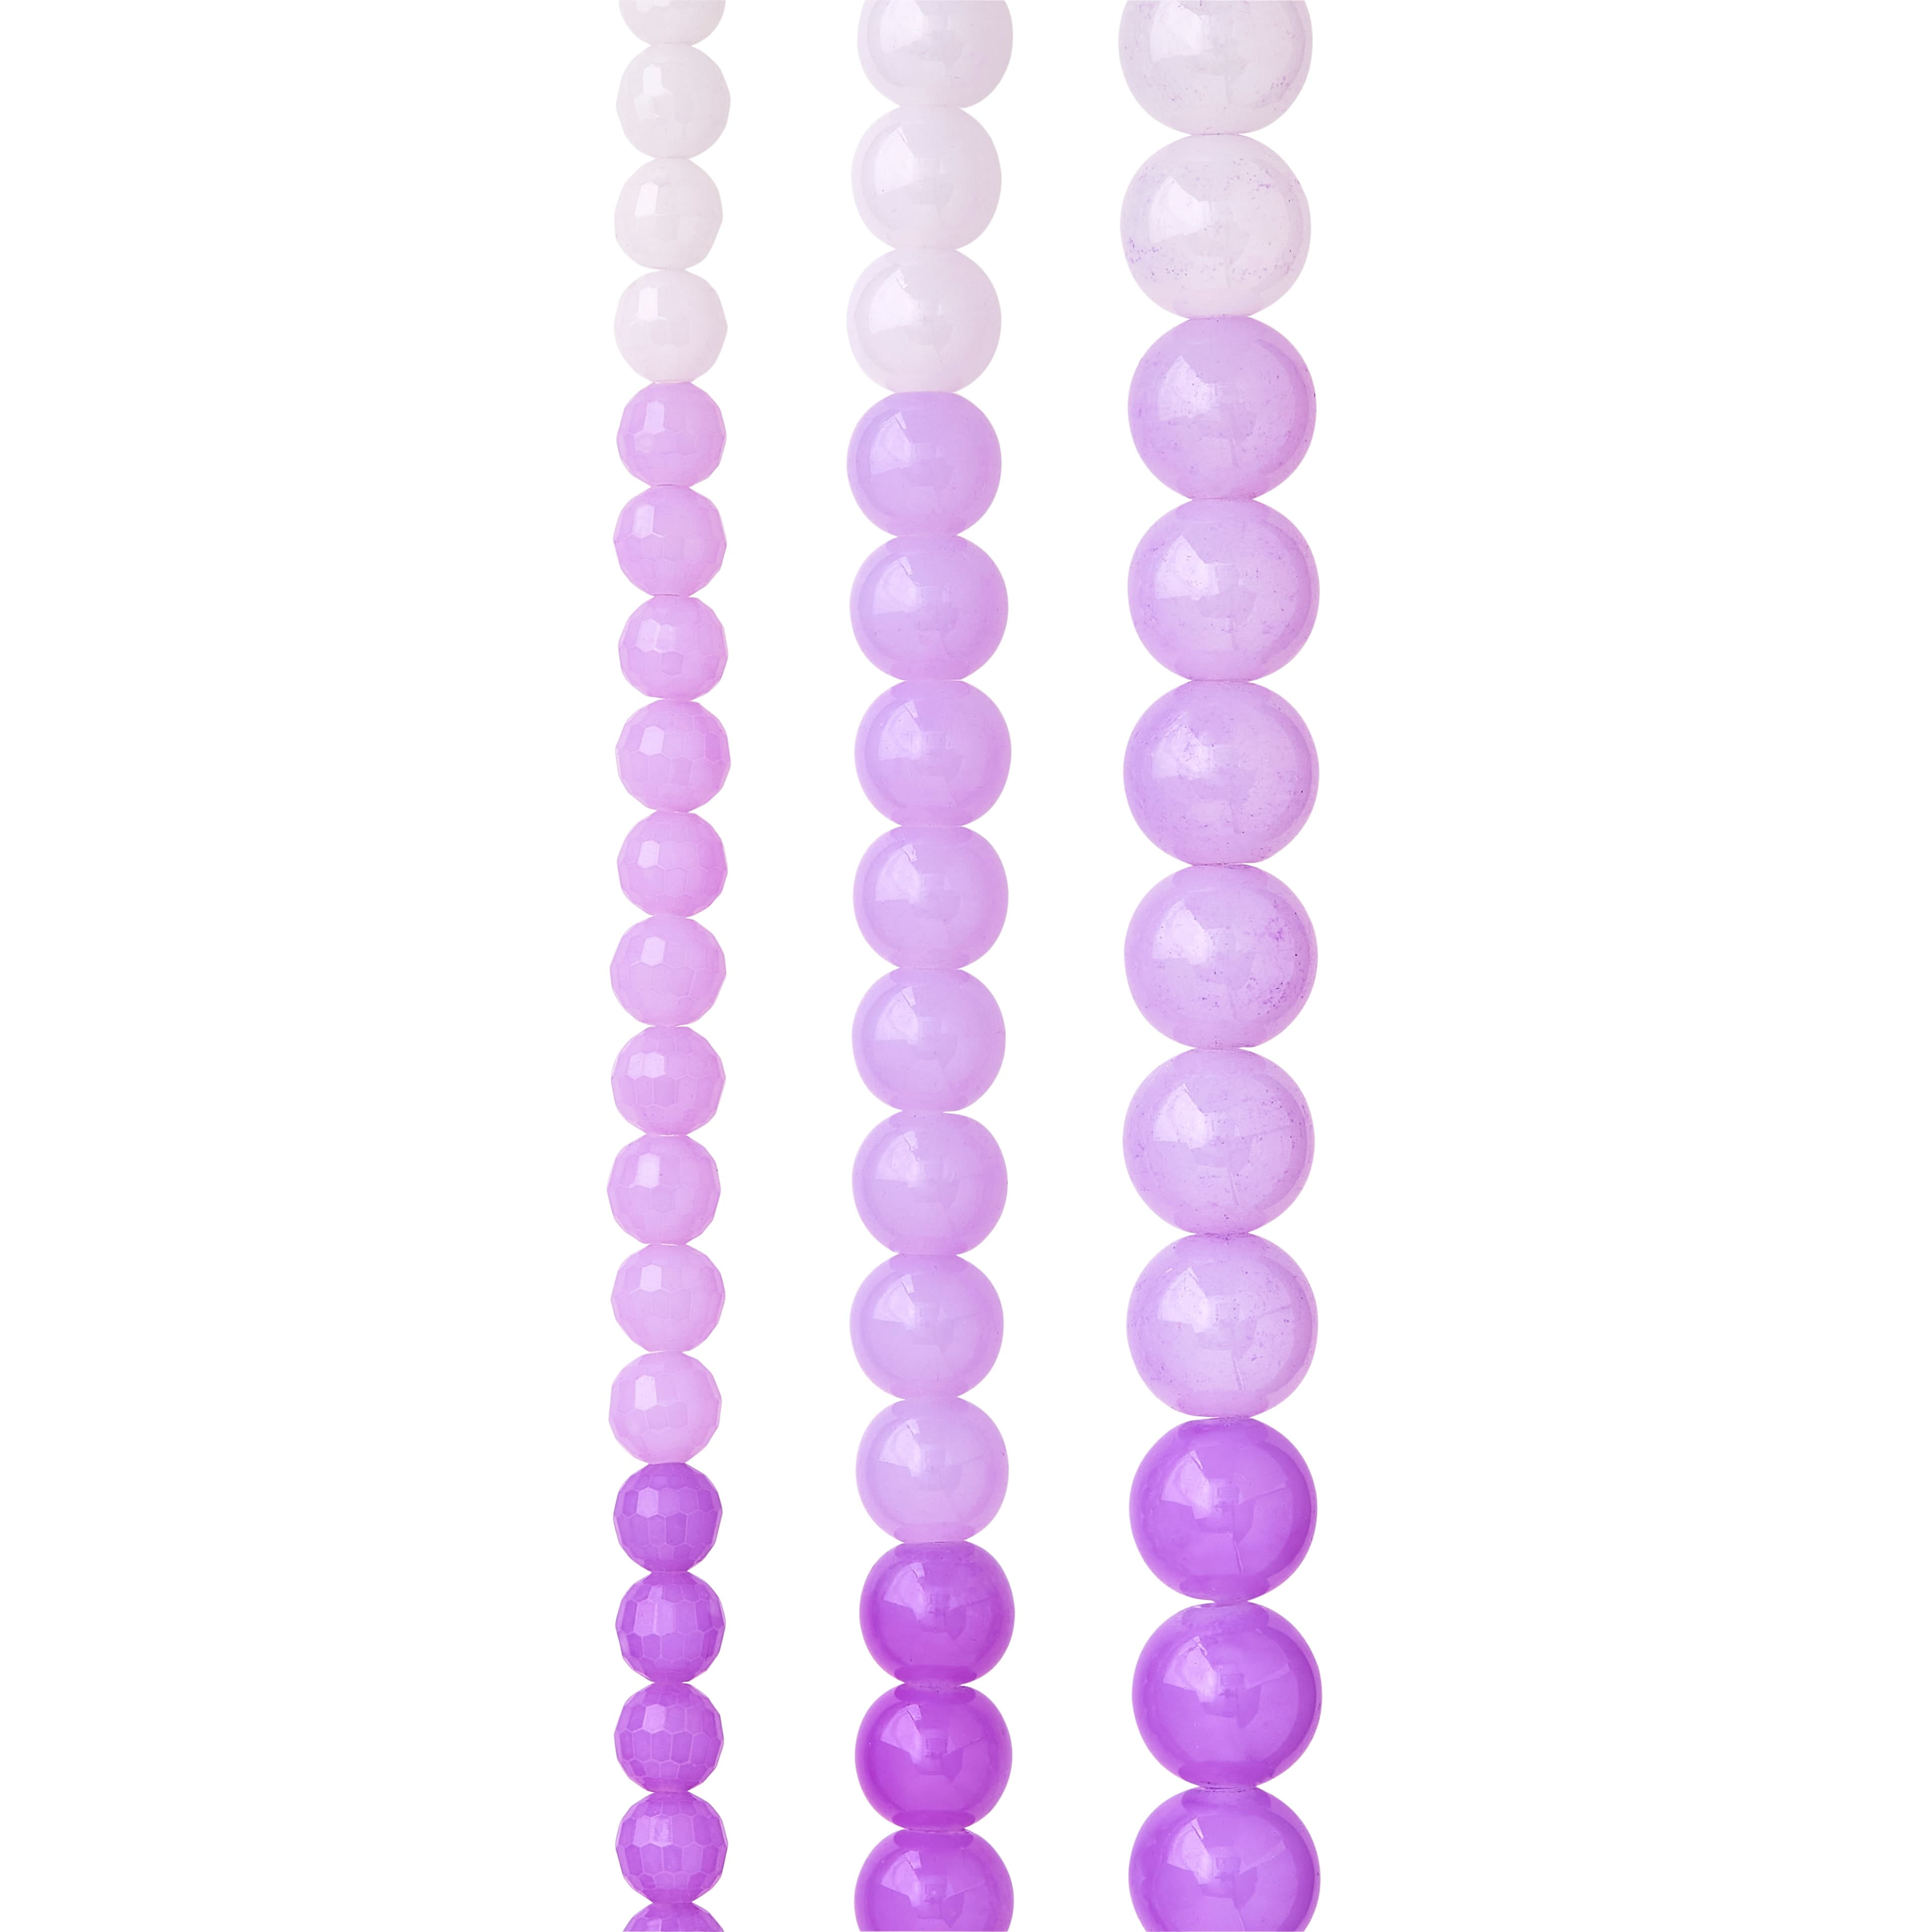 Buy the Multicolor Round Beads Set by Bead Landing™ at Michaels